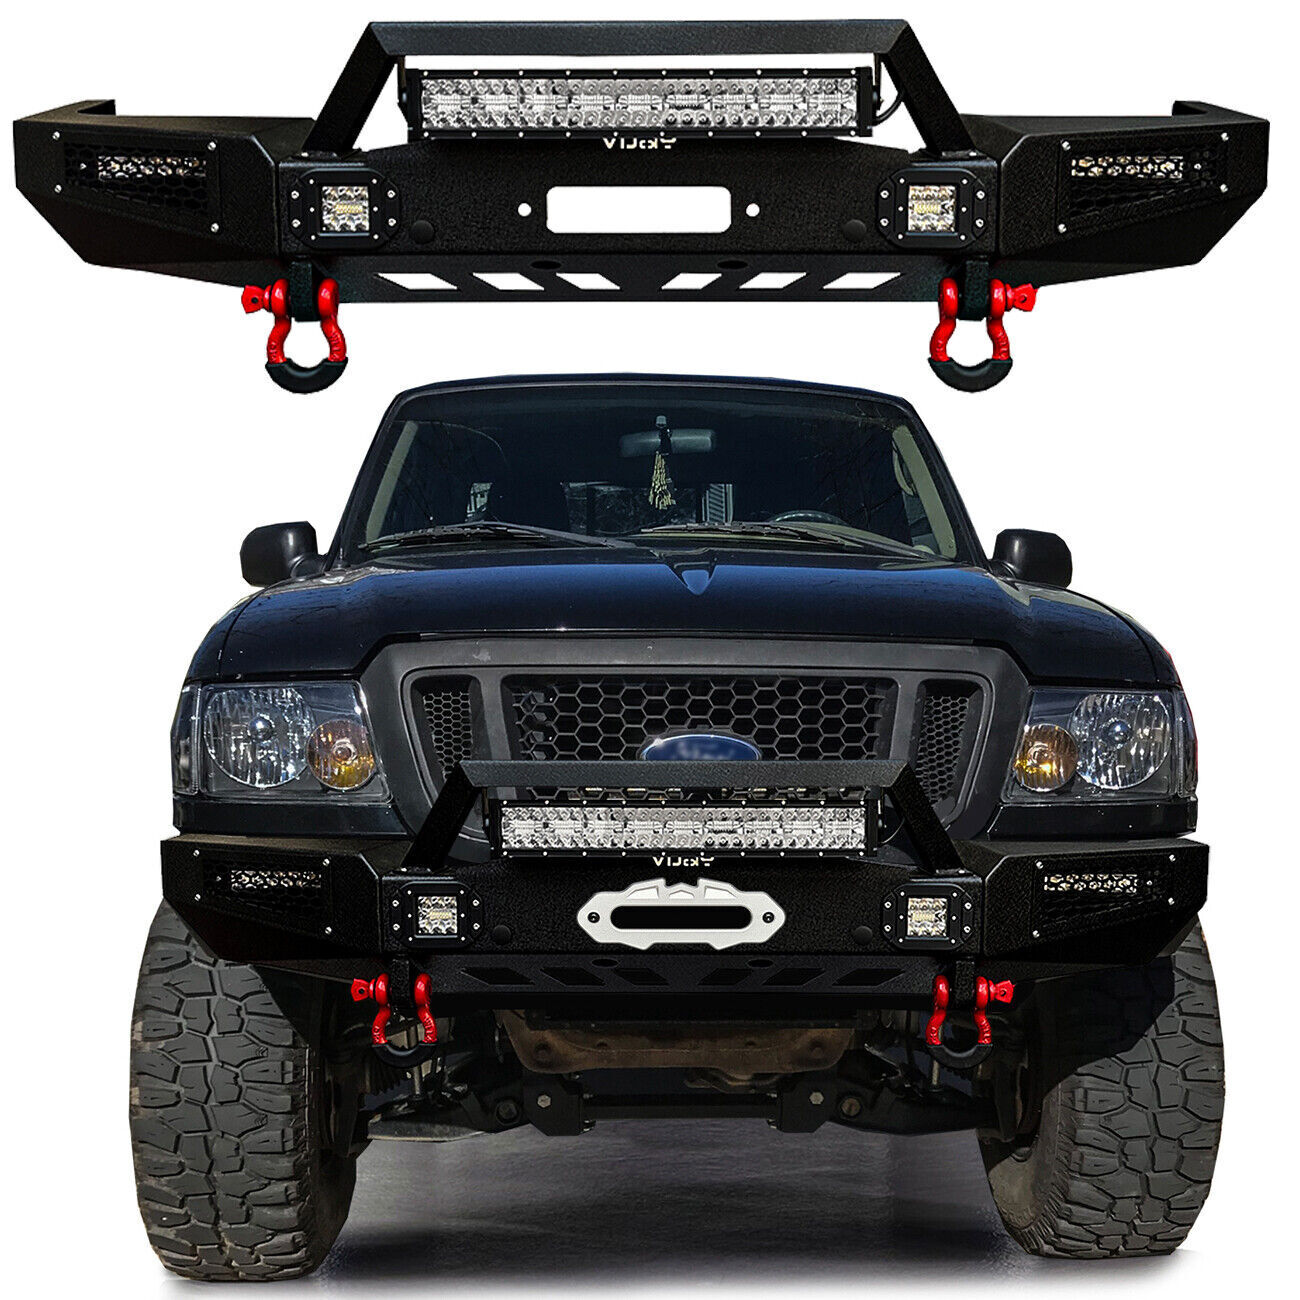 Vijay Fits 1993-1997 Ford Ranger Front or Rear Bumper w/Winch Plate & LED Lights